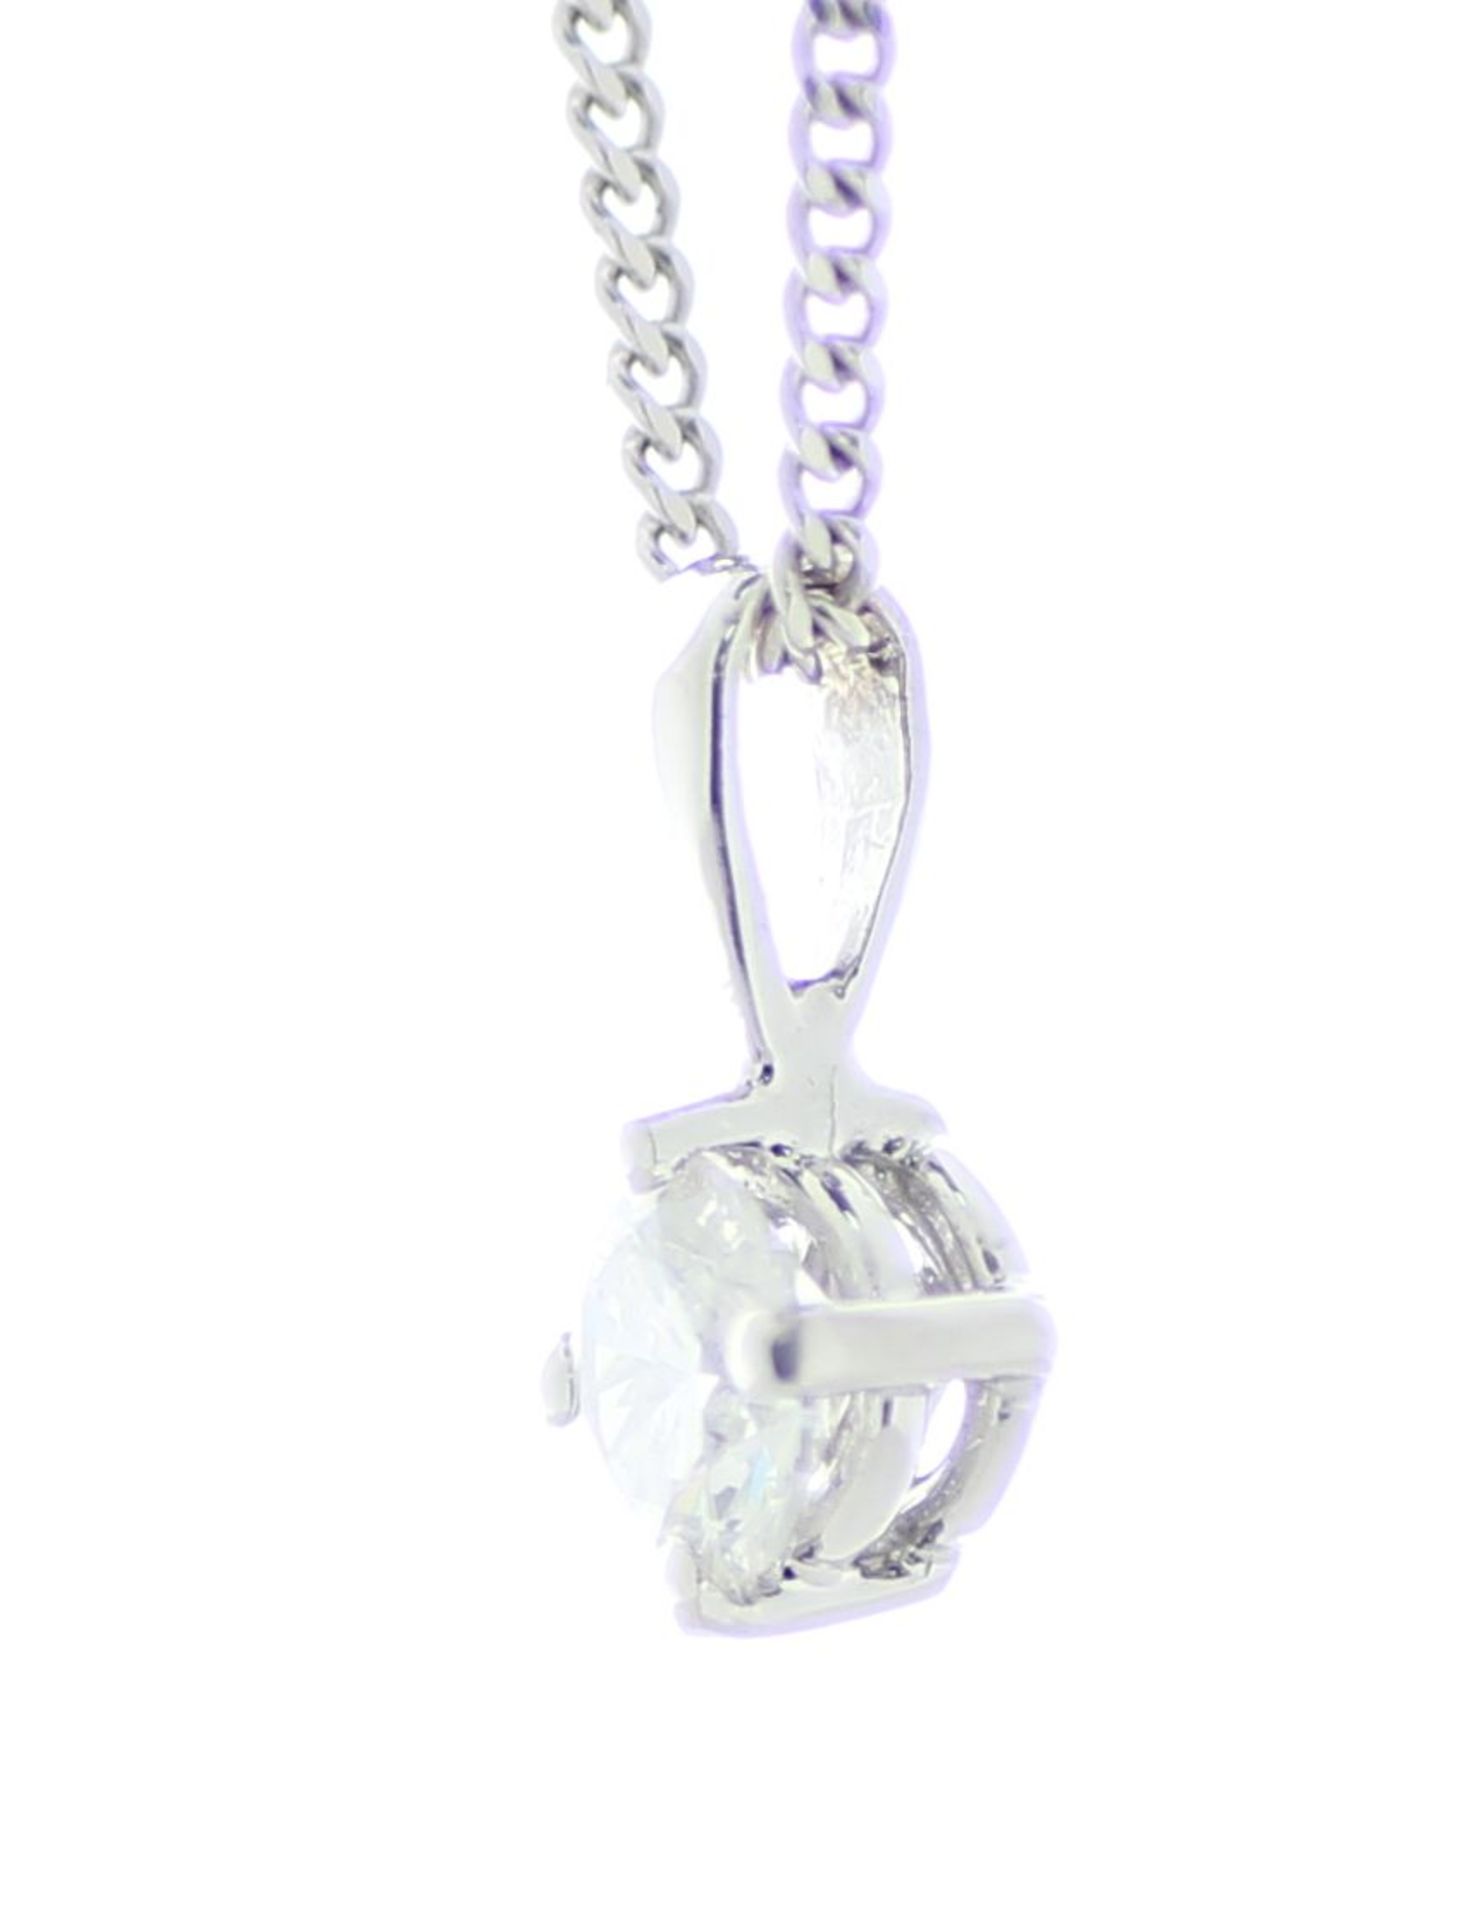 18ct White Gold Single Stone Prong Set Diamond Pendant And Chain 0.51 Carats - Valued By IDI £3, - Image 2 of 3